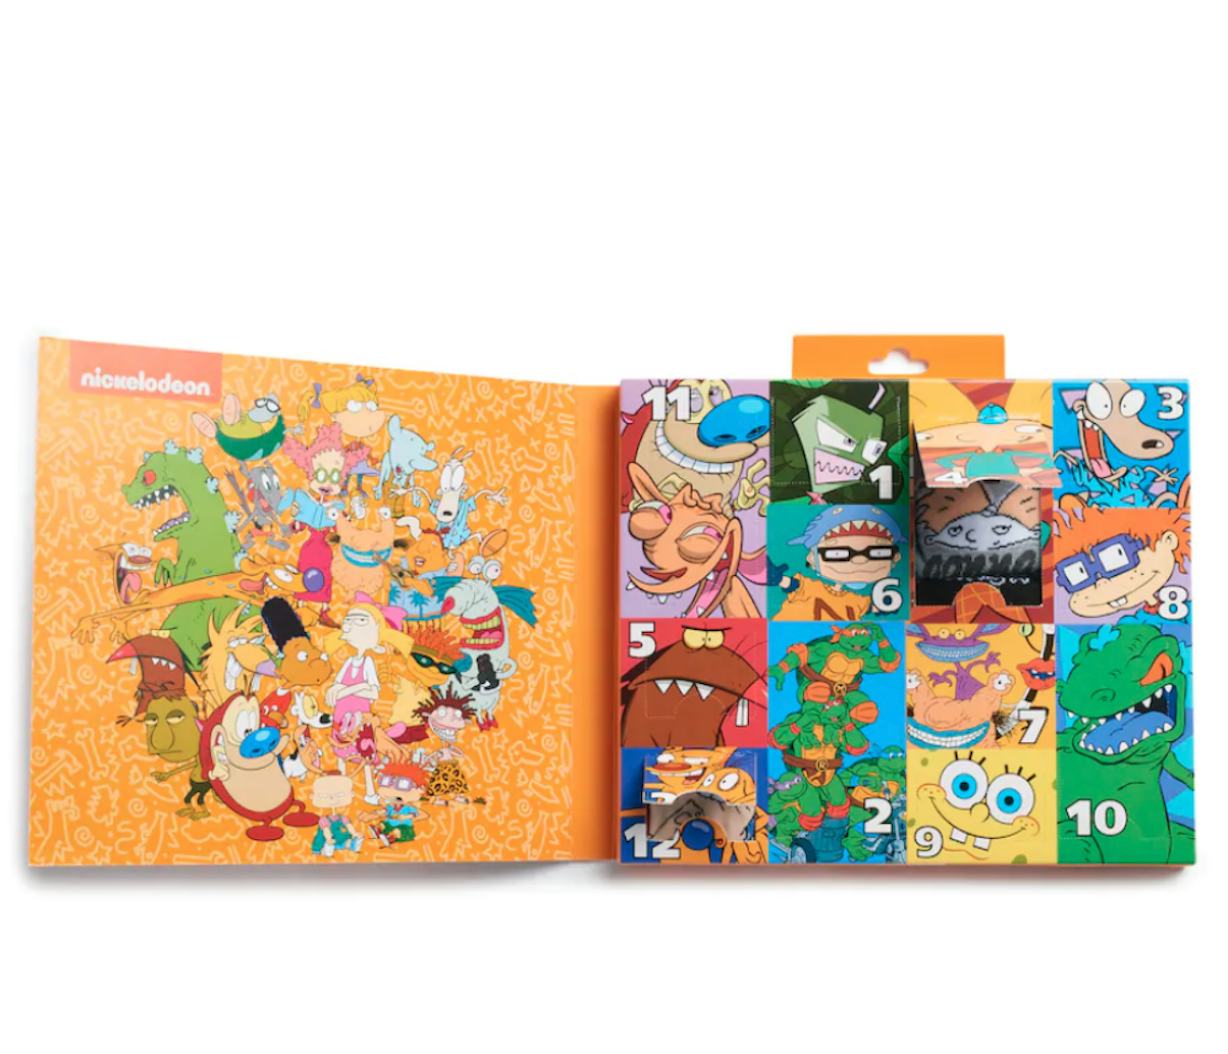 Nickelodeon’s Sock Advent Calendar From Kohl’s Will Make Your ‘90s Baby